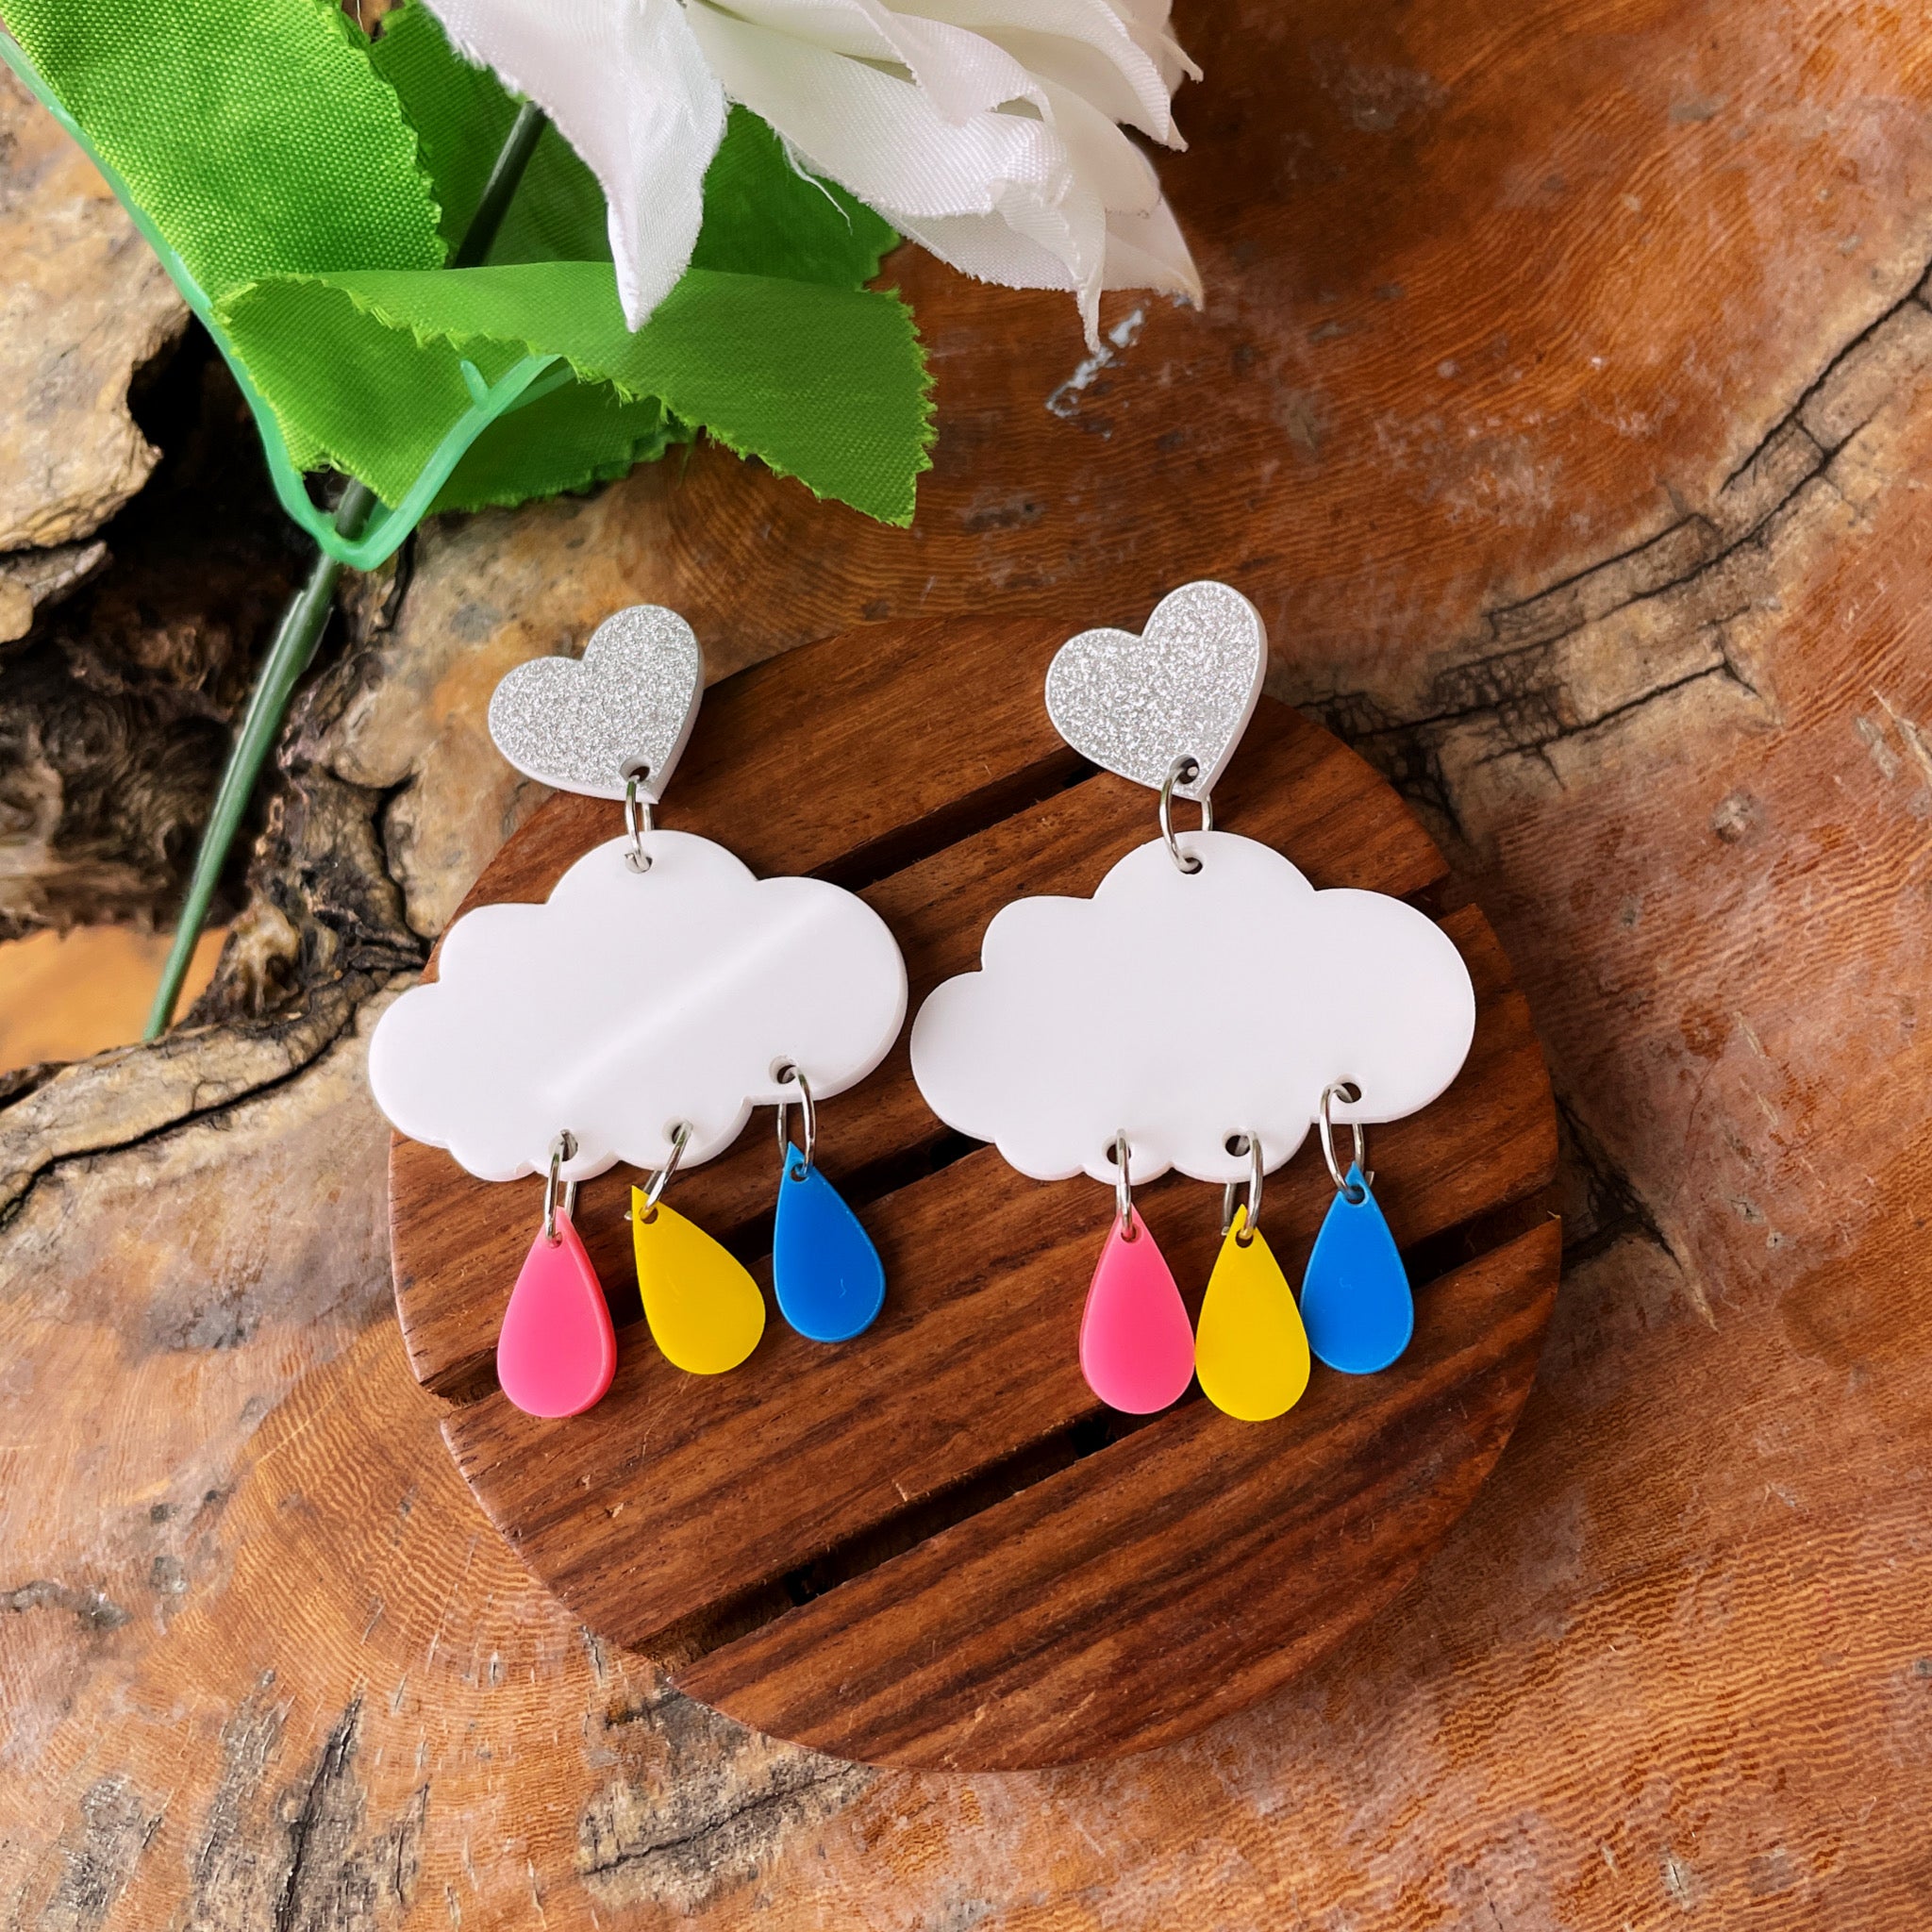 Rainy Cloud Earrings - multi color - Pink, Yellow, and Blue, with white clouds and silver hearts - Nian by Nidhi - in a white, green, and brown background